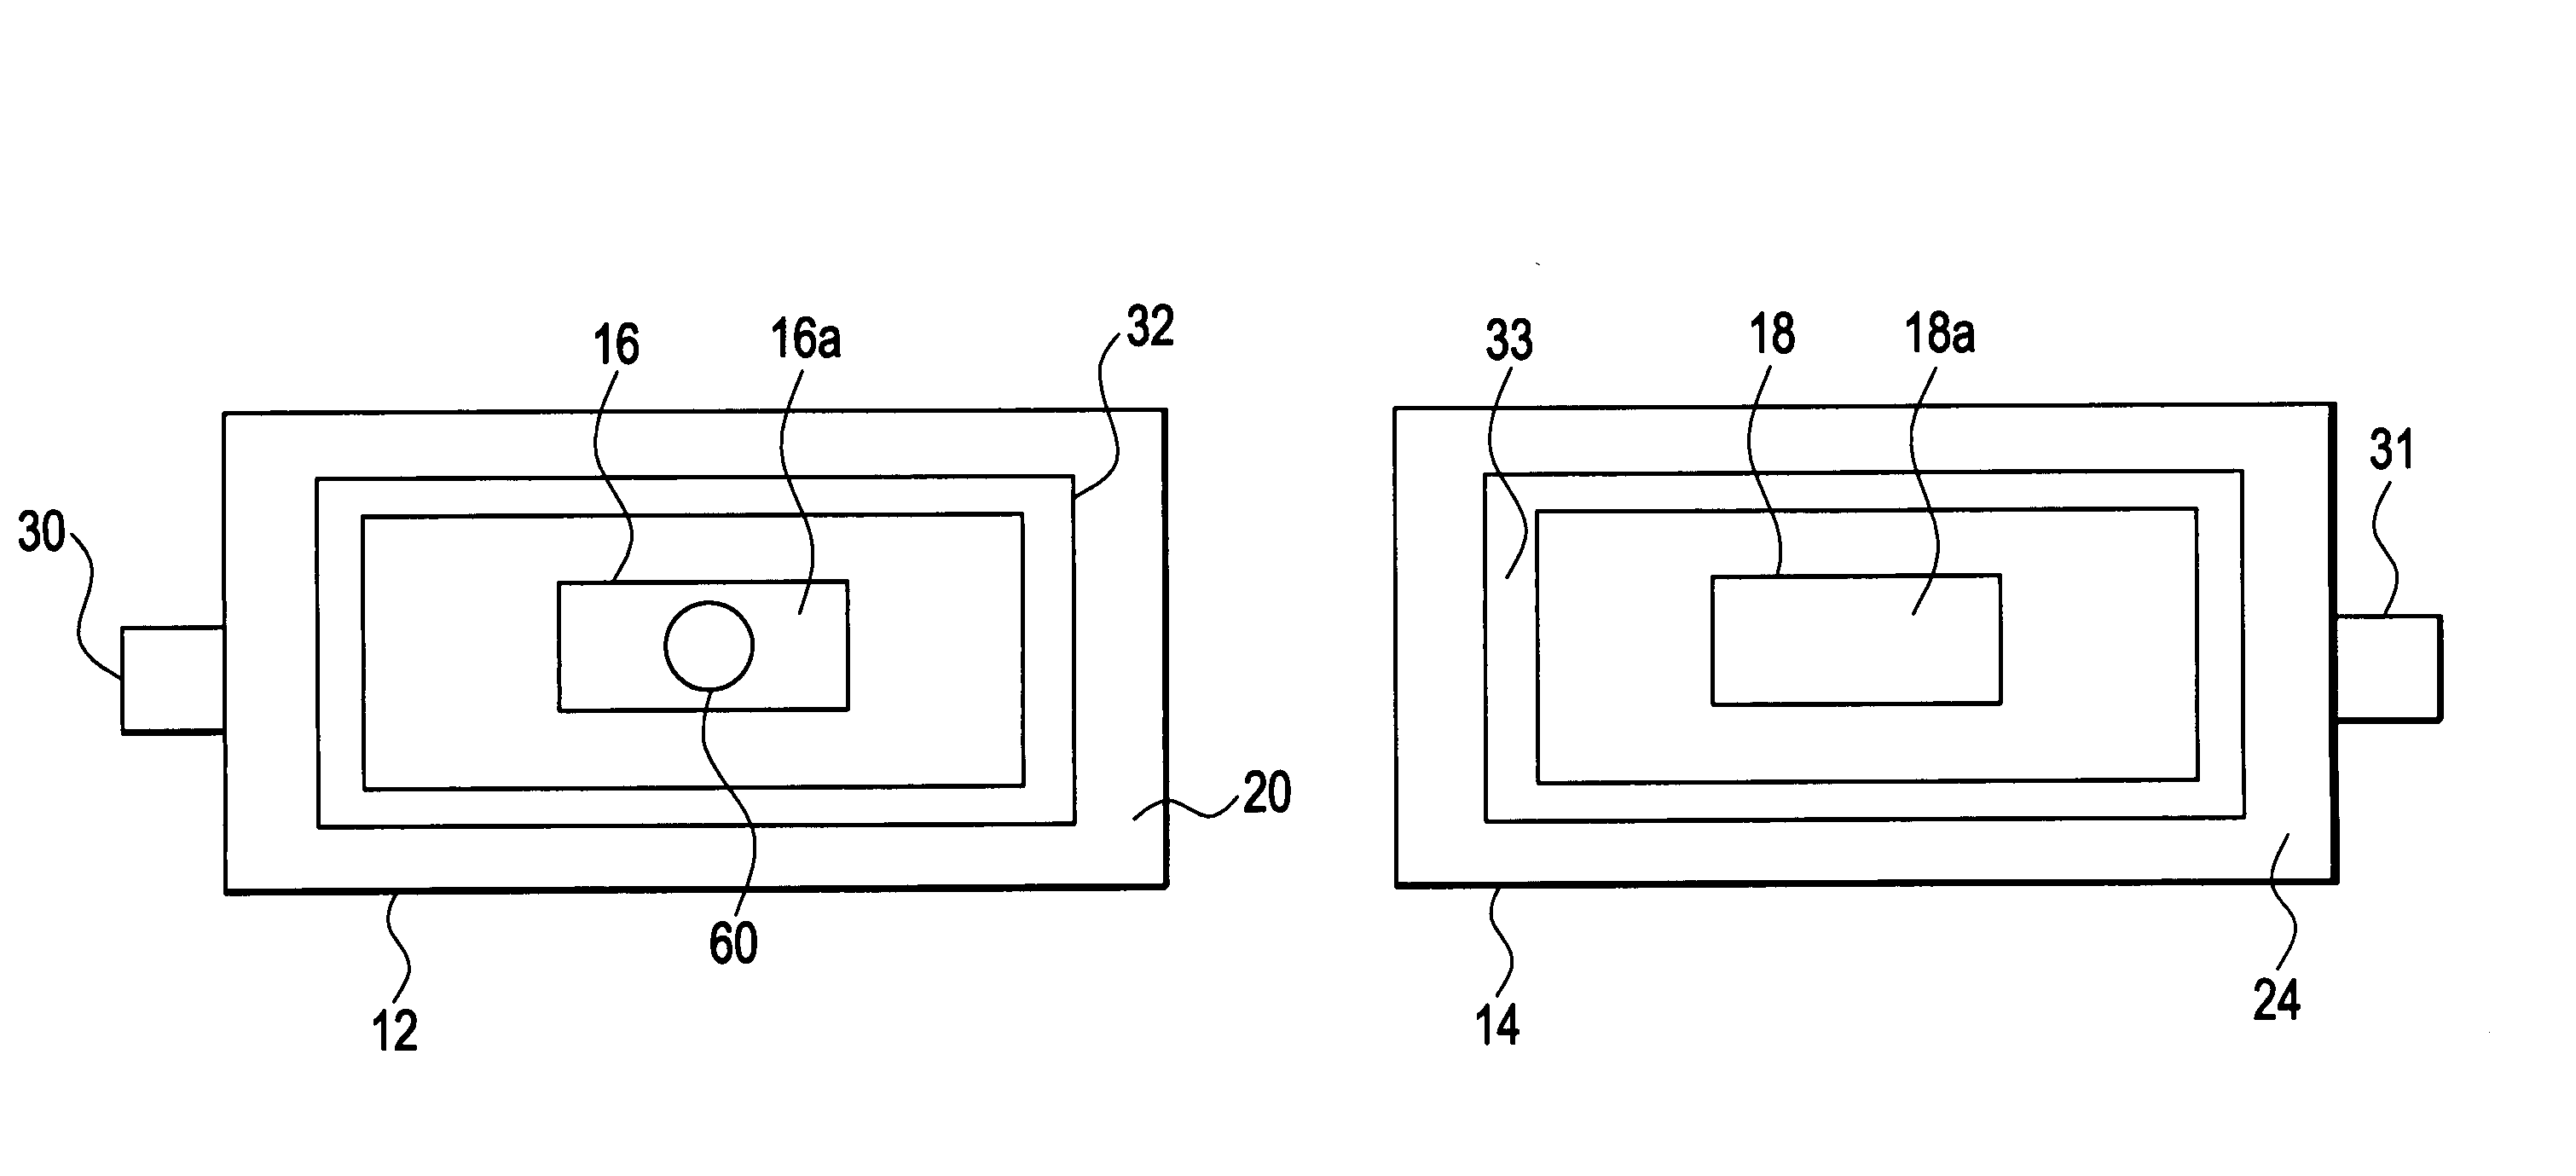 Ophthalmic lens package and methods of its use